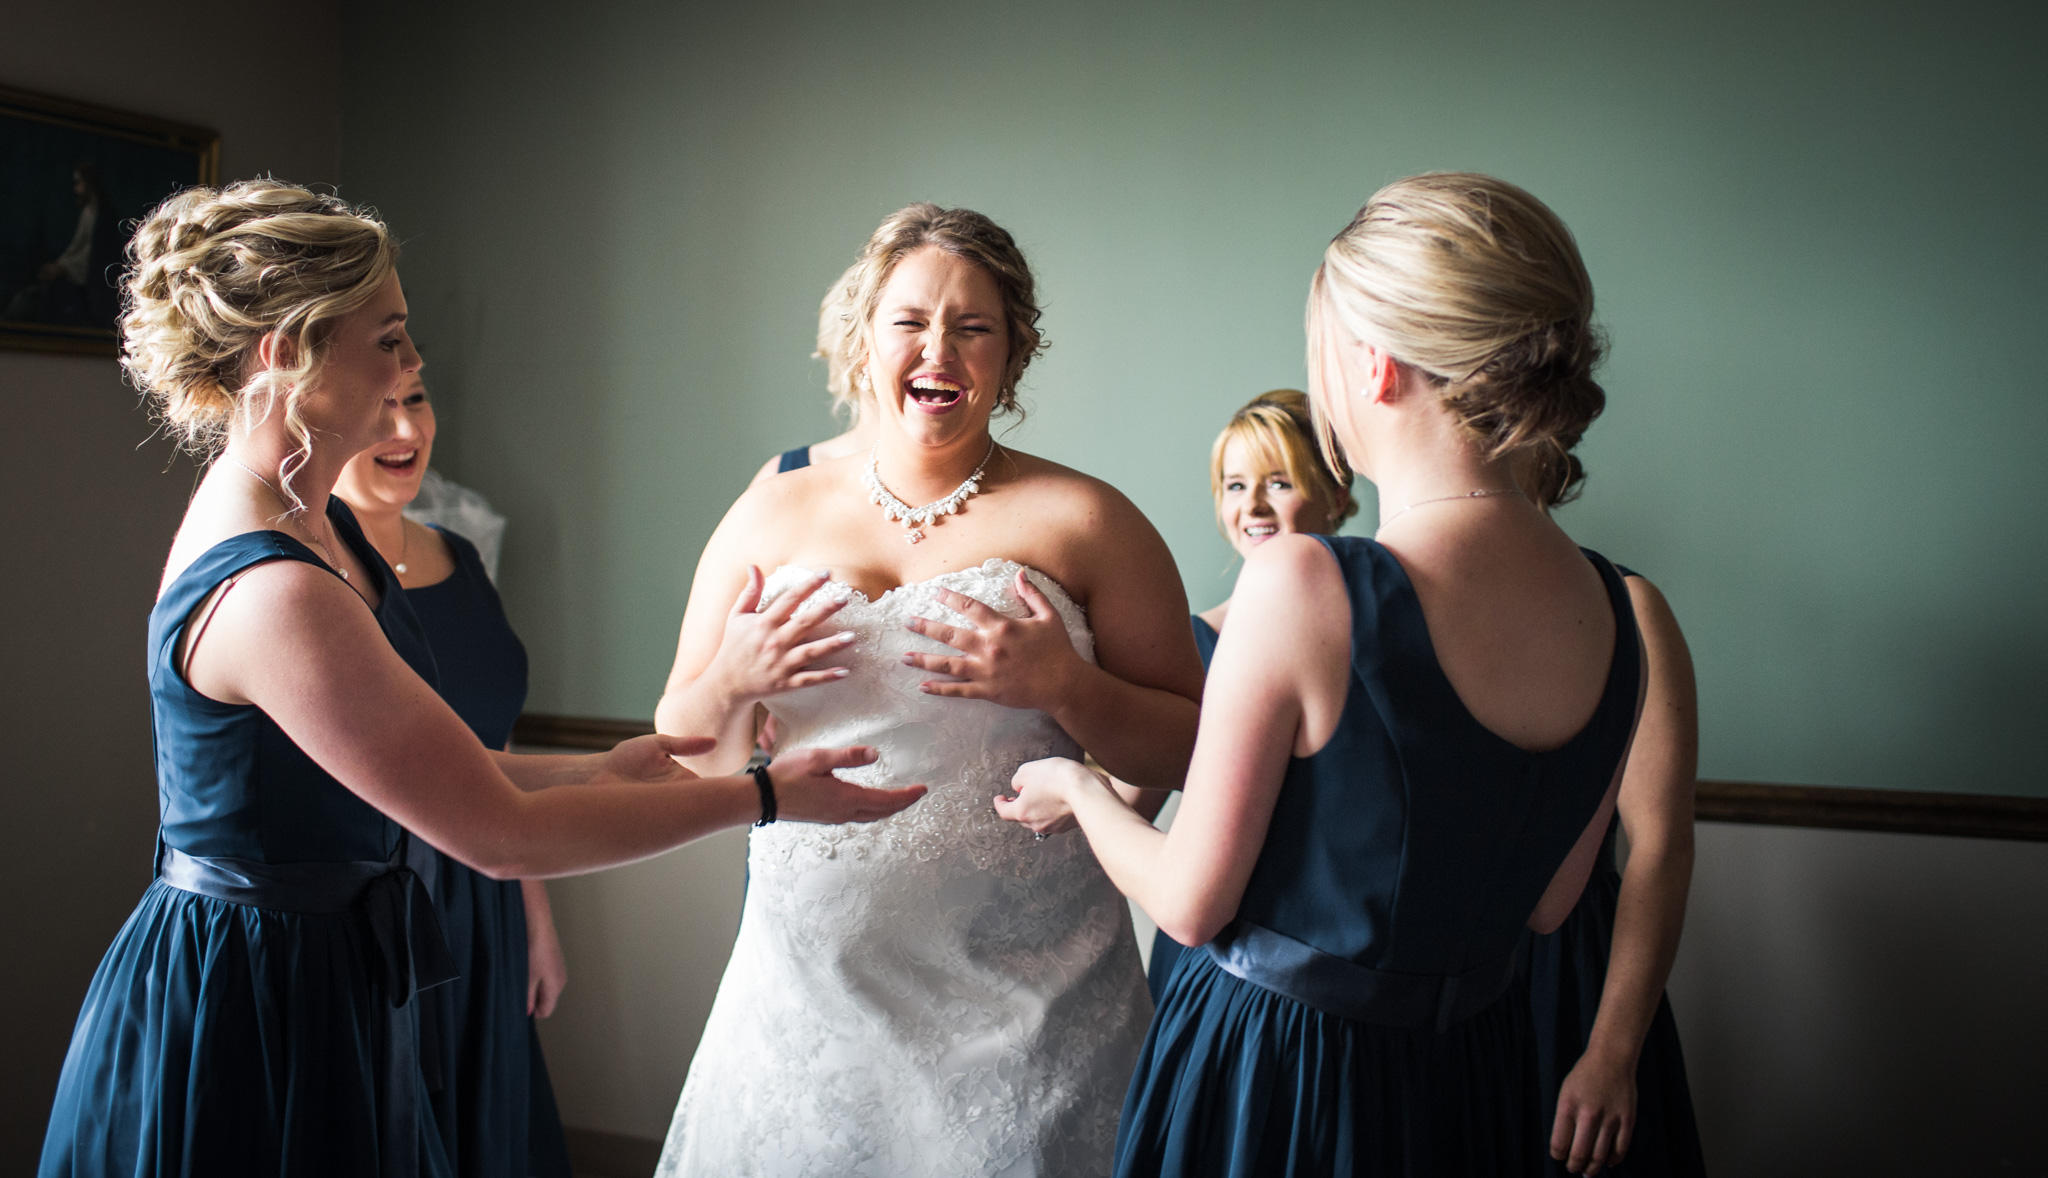 Zibell Spring Wedding, Bride and Groom, Powerful, Connected, Exploration, Laura Duggleby Photography -61.JPG